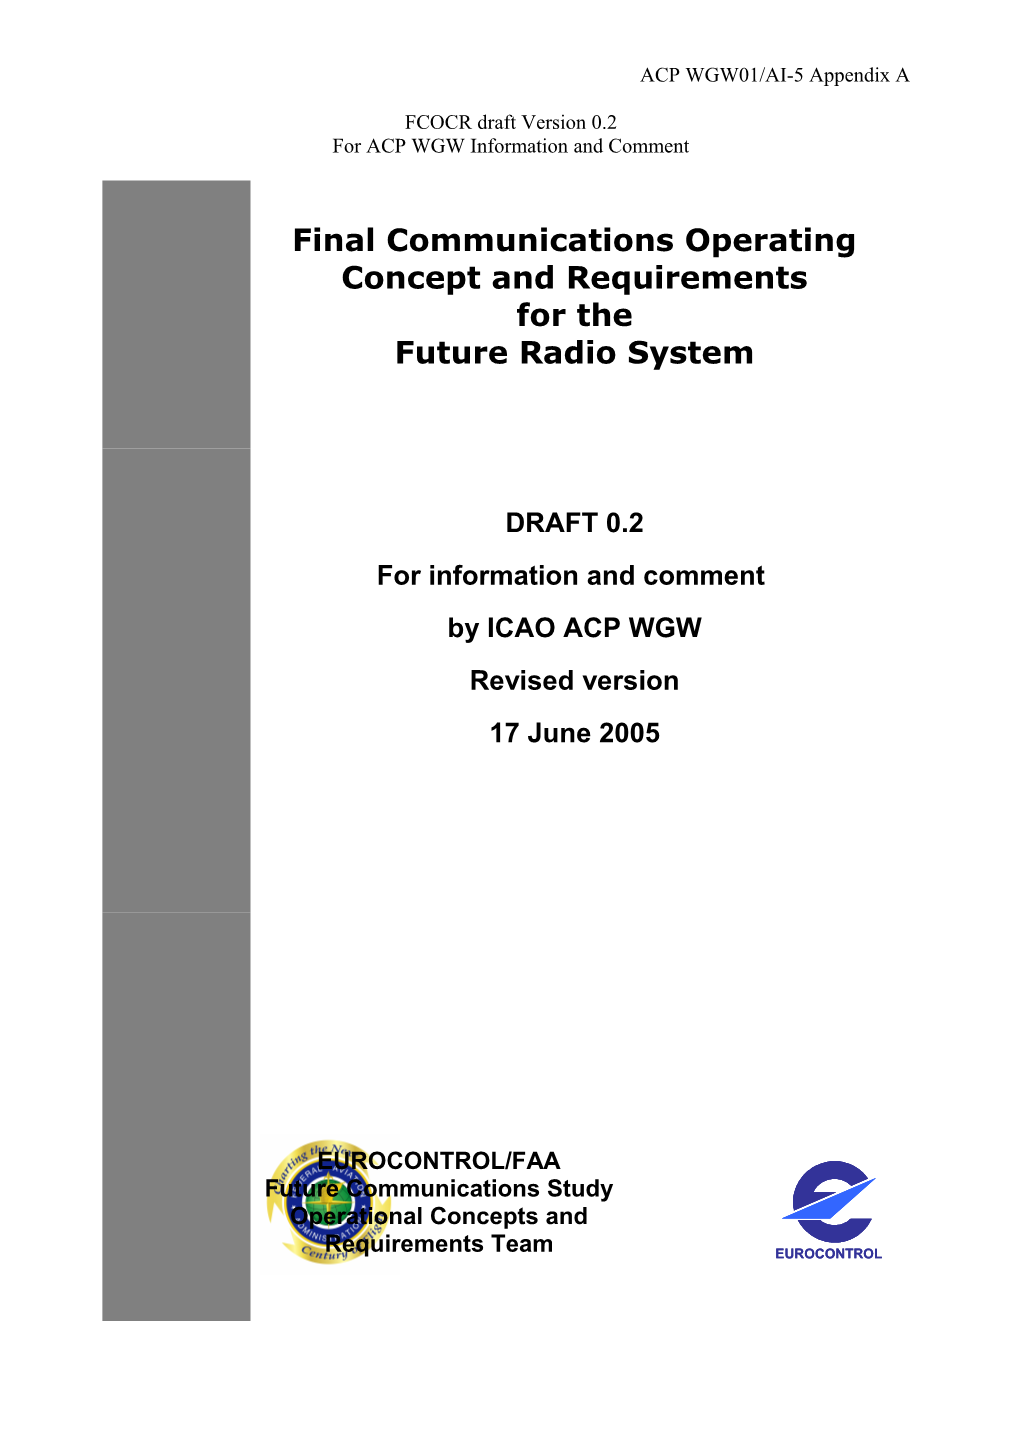 Communications Operating Concept and Requirements for the Future Radio System